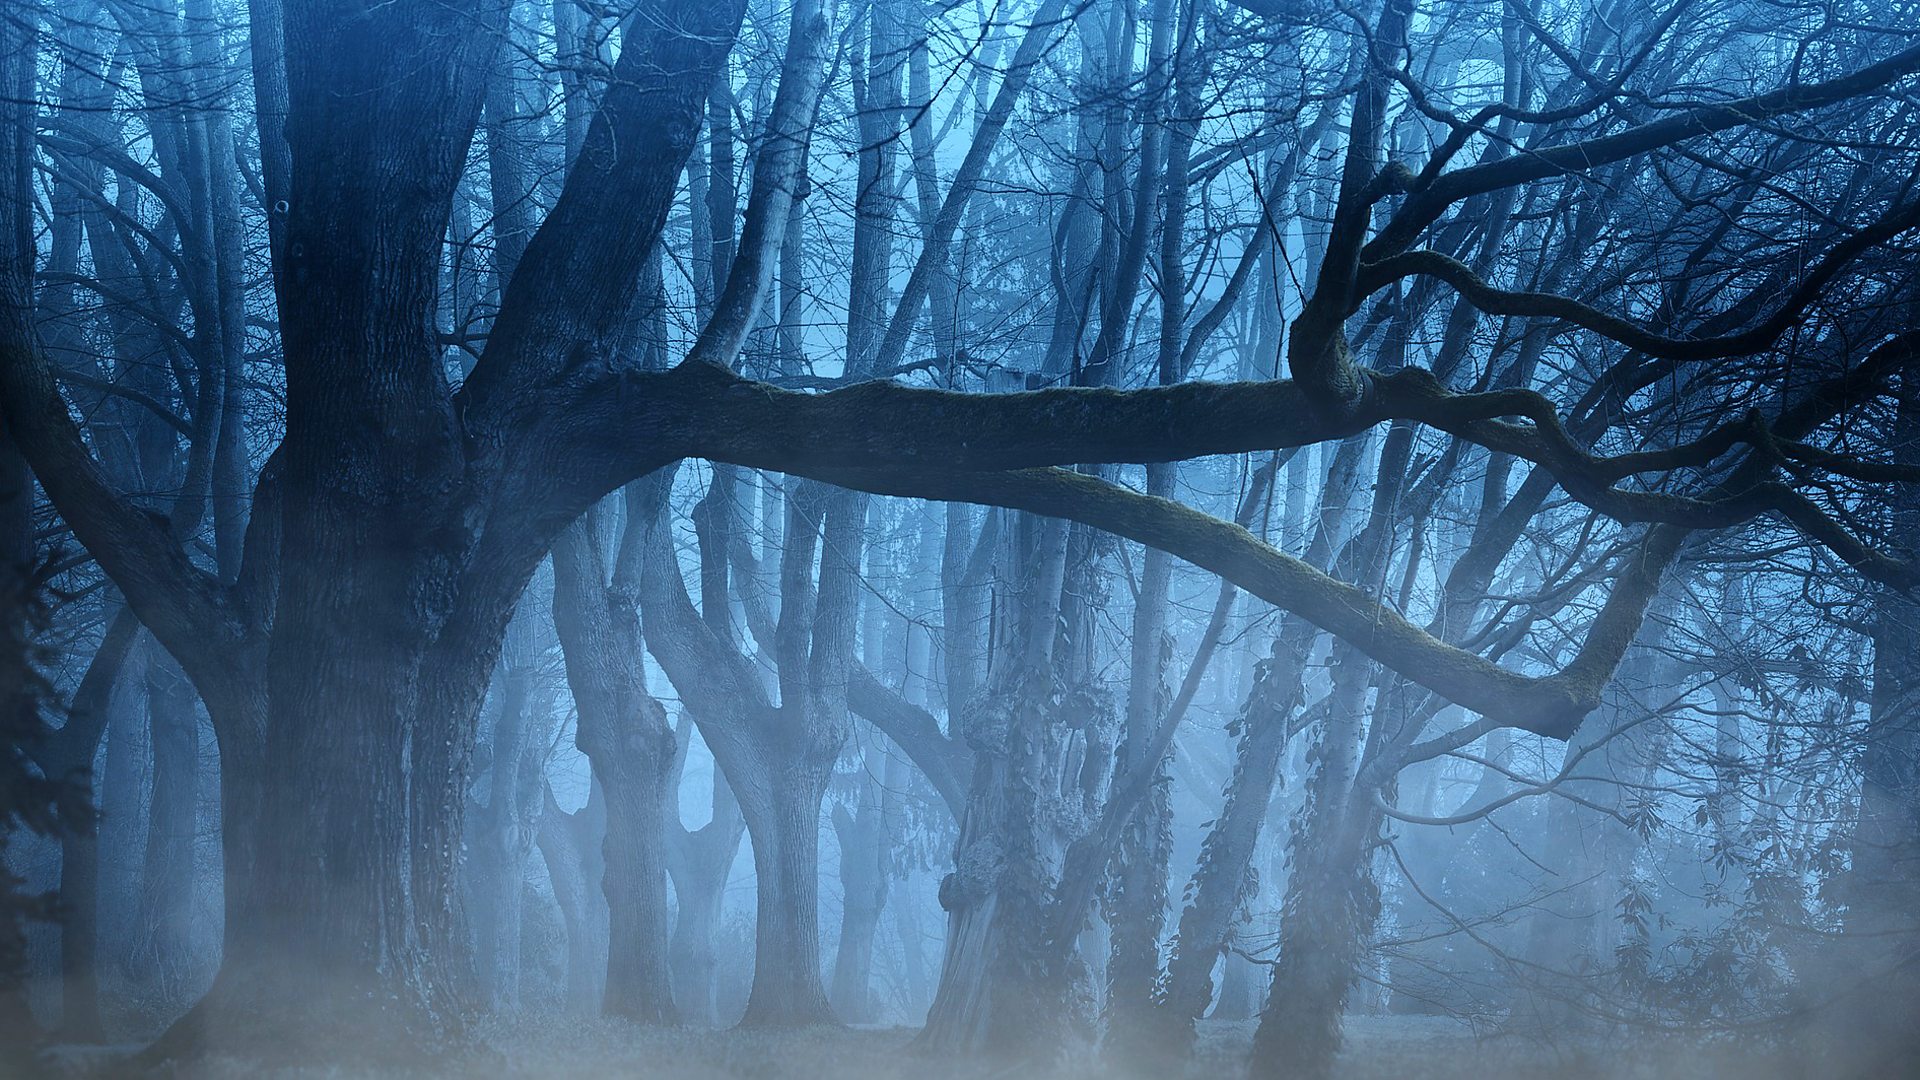 BBC Scotland - BBC Scotland - What are the spine-tingling sounds we hear in  the forest at night?